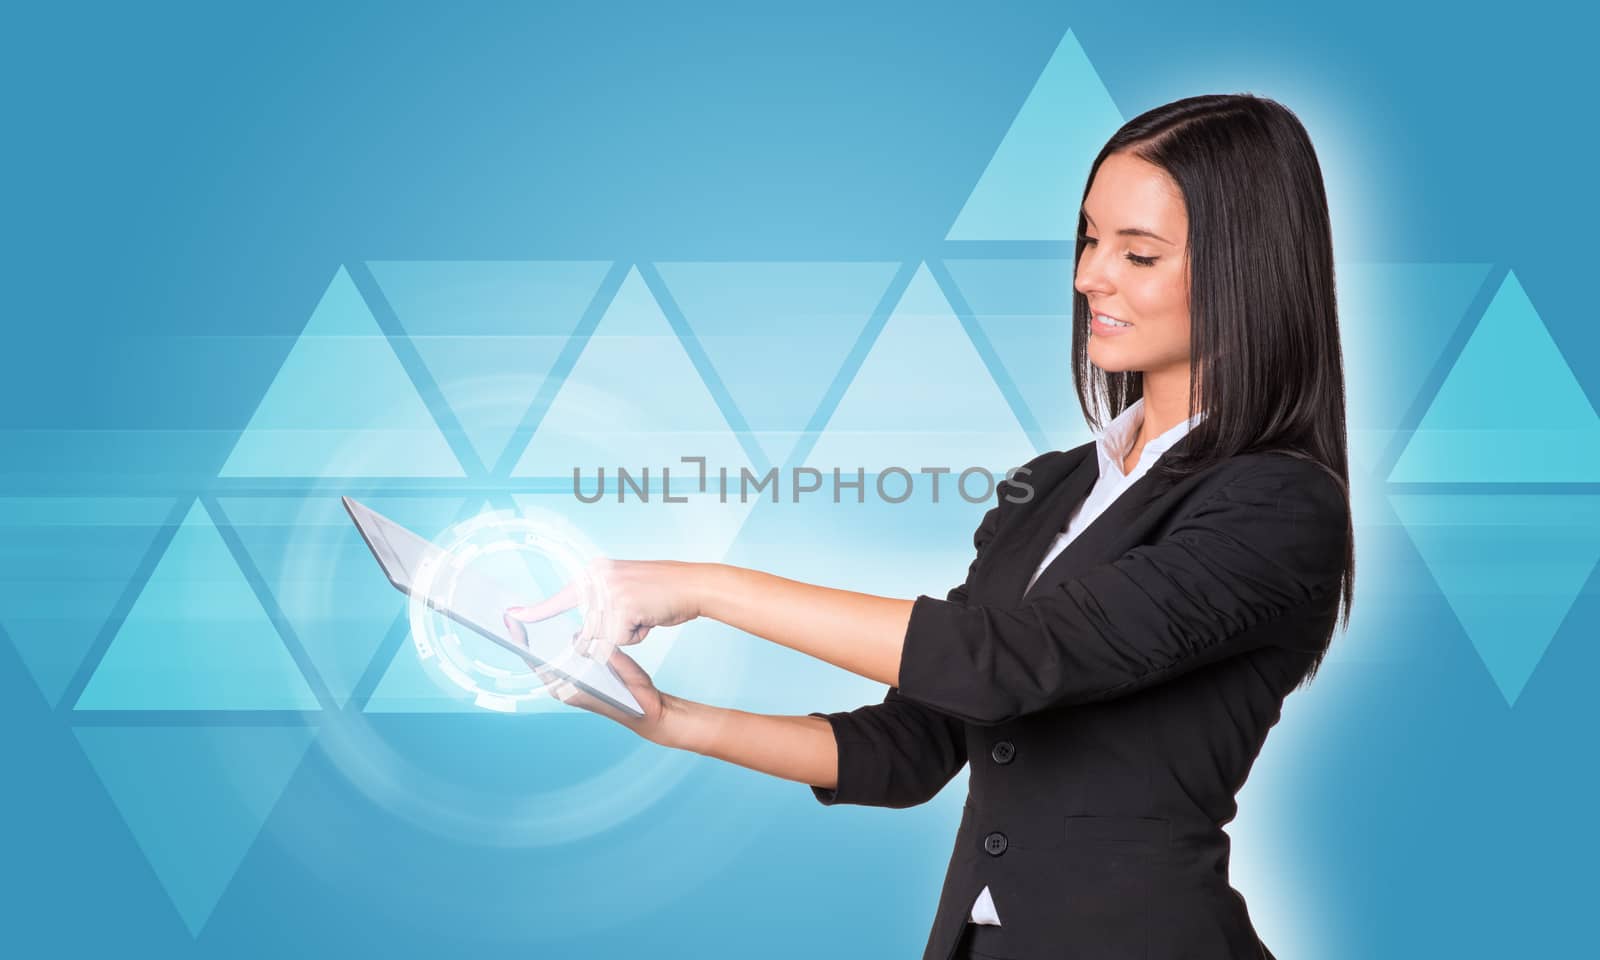 Beautiful businesswomen in suit using digital tablet. Transparent triangles with glow circles. Concept background